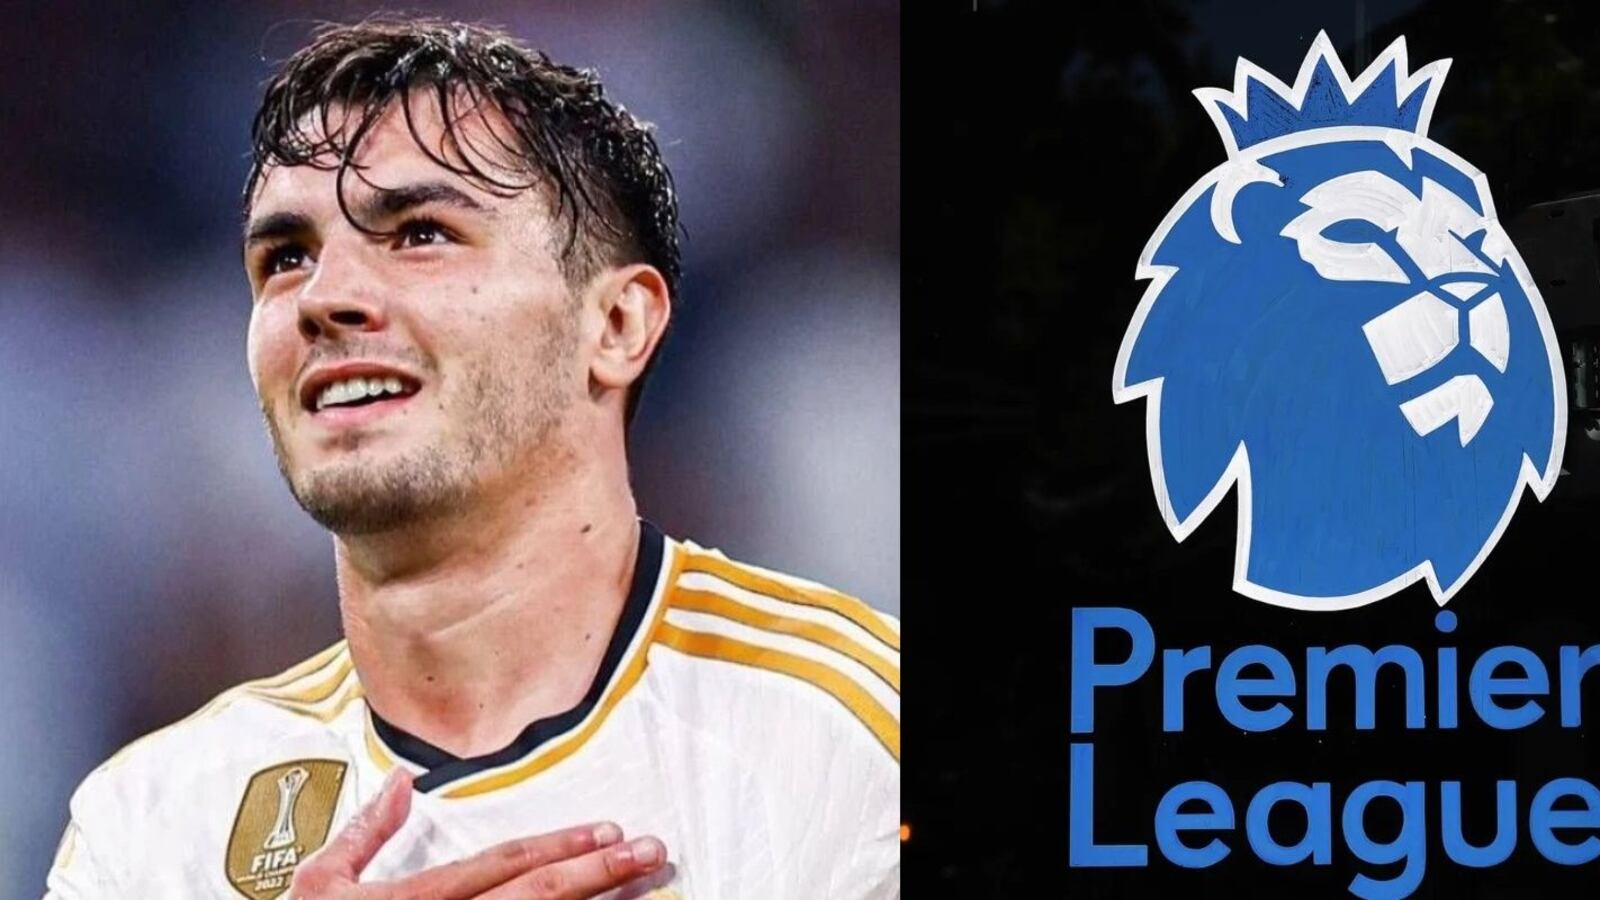 They want him yes or yes, the Premier clubs that want Brahim Díaz